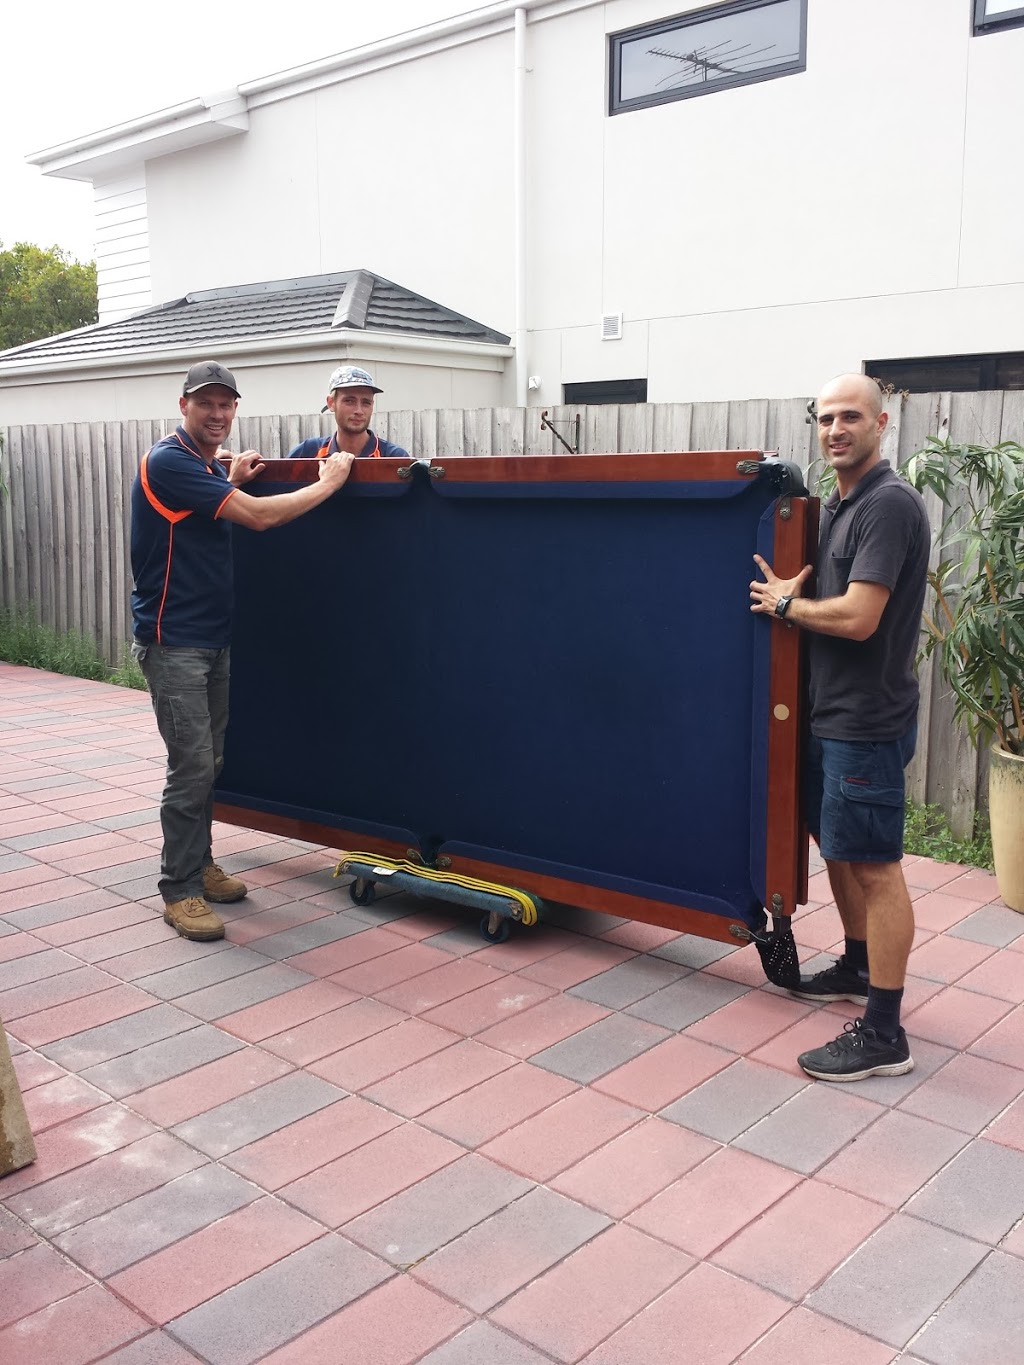 Pronto Removals-House-Furniture-Piano-Home and Office Removalist | moving company | 35 Nepean Ave, Hampton East VIC 3188, Australia | 0435786034 OR +61 435 786 034